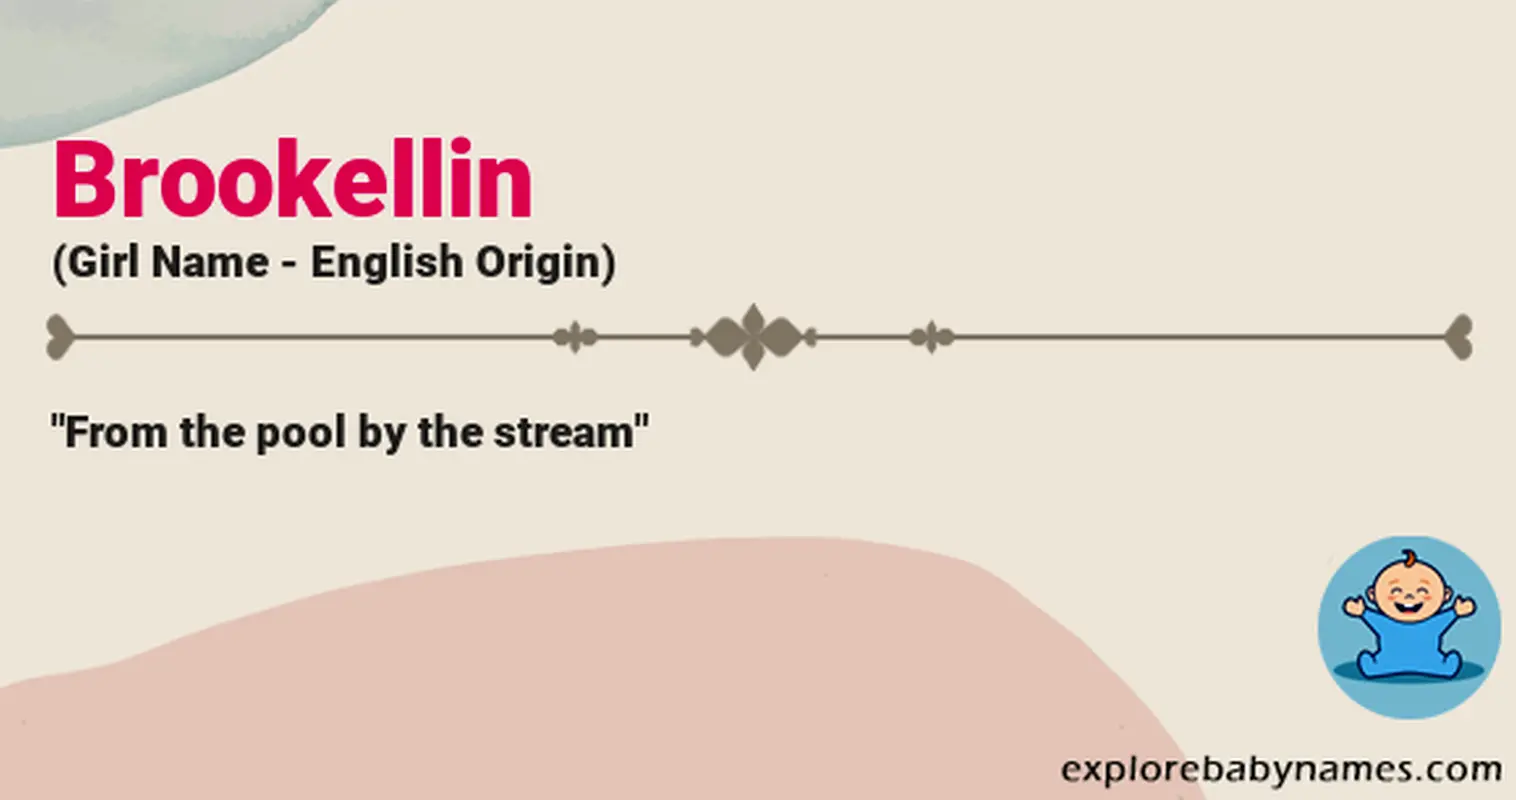 Meaning of Brookellin